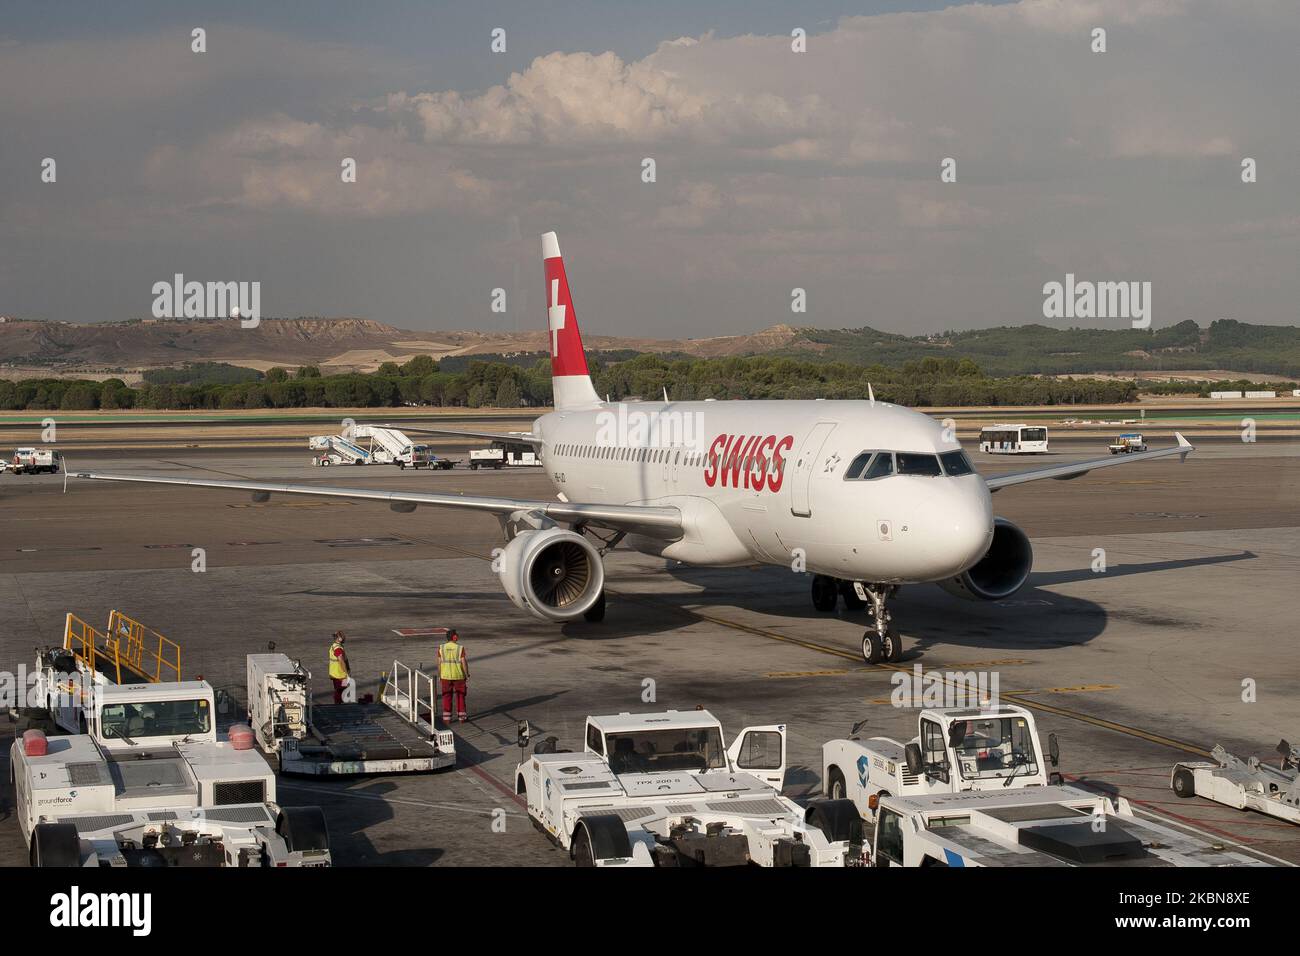 Swiss International Air Lines Airlines operated passenger planes operated stop on the runway of Madrid Barajas airport, operated by Aena SA, in Madrid, Spain, on August 7, 2013. (Photo by Oscar Gonzalez/NurPhoto) Stock Photo